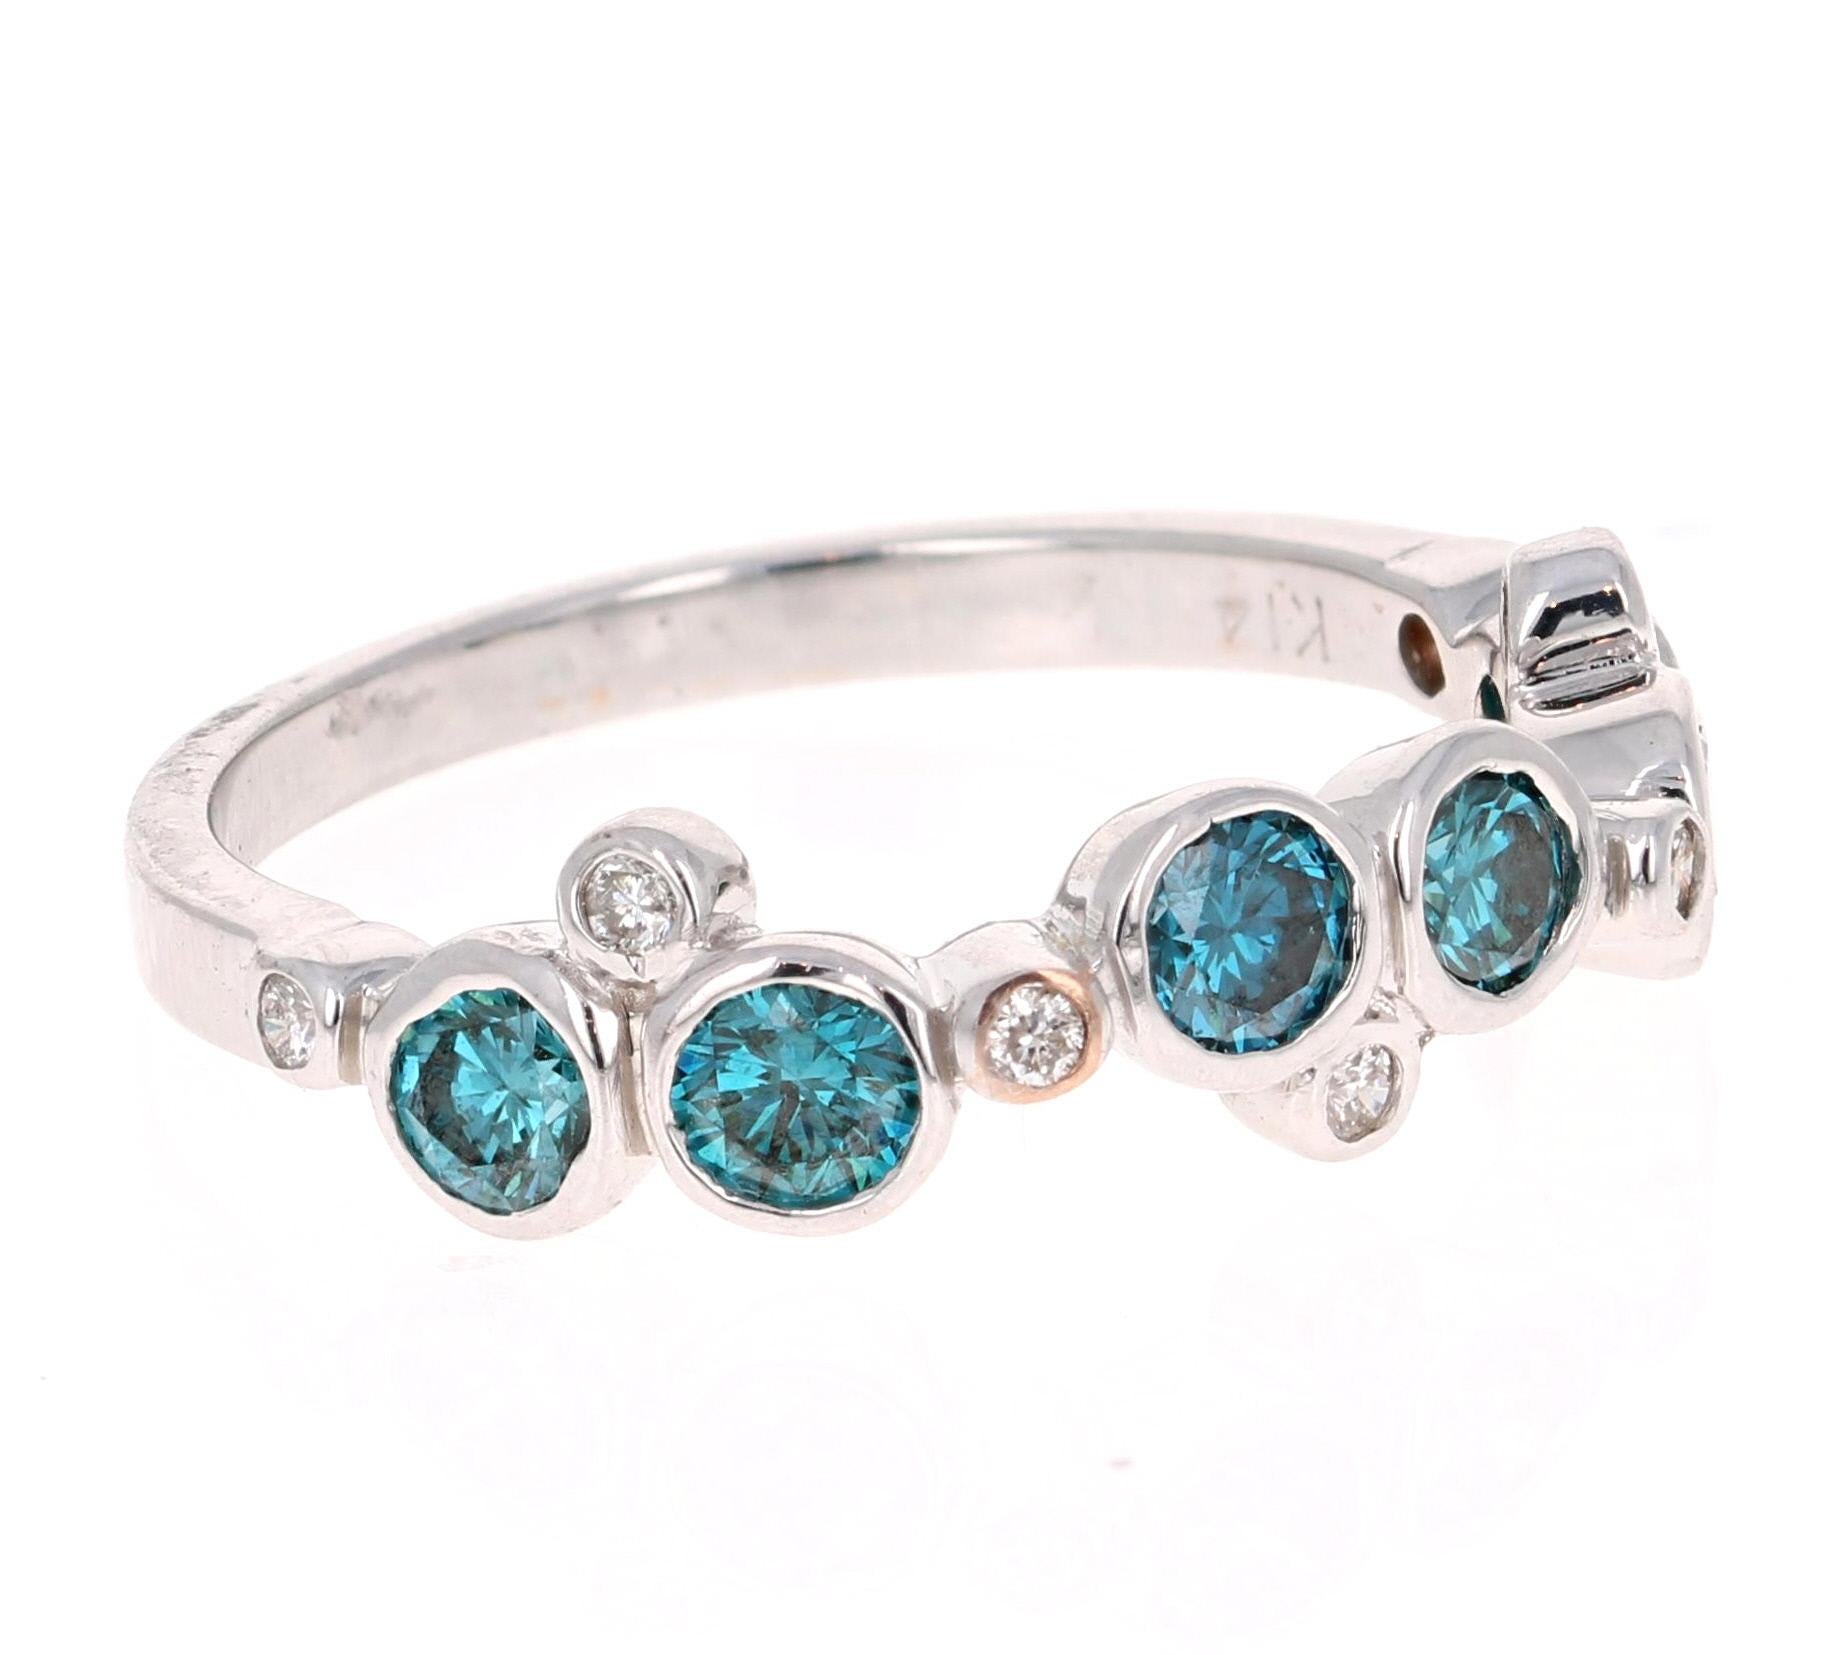 Cute and Dainty 0.90 Carat Blue Diamond and White Diamond Band that is sure to be a great addition to anyone's accessory collection.   There are 6 Round Cut Blue Diamonds that weigh 0.82 carats and 7 Round Cut Diamonds that weigh 0.08 carats.  The